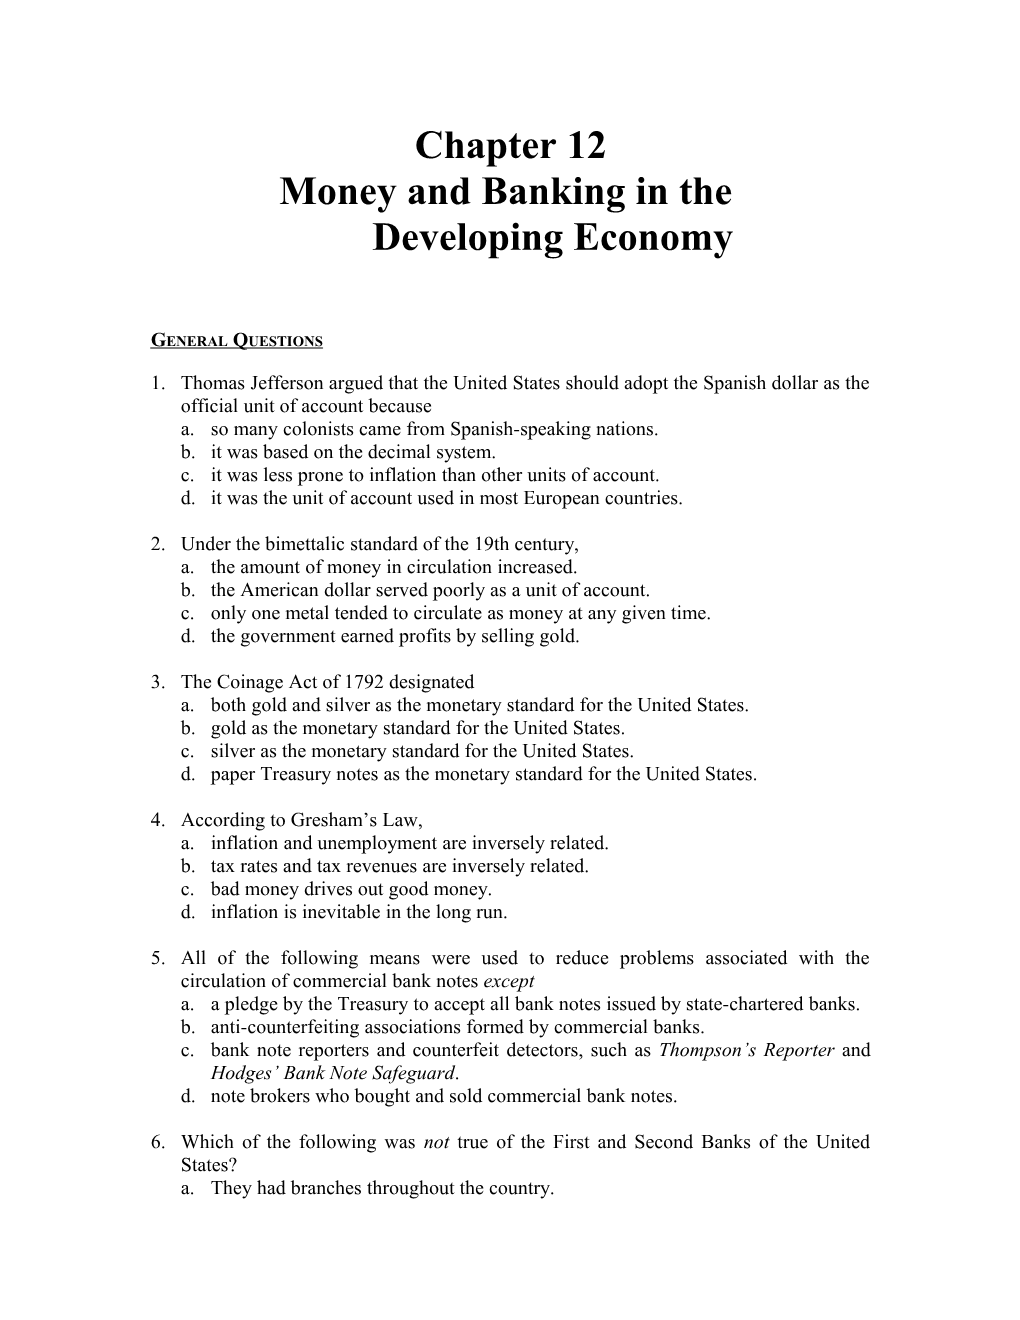 Money and Banking in the Developing Economy